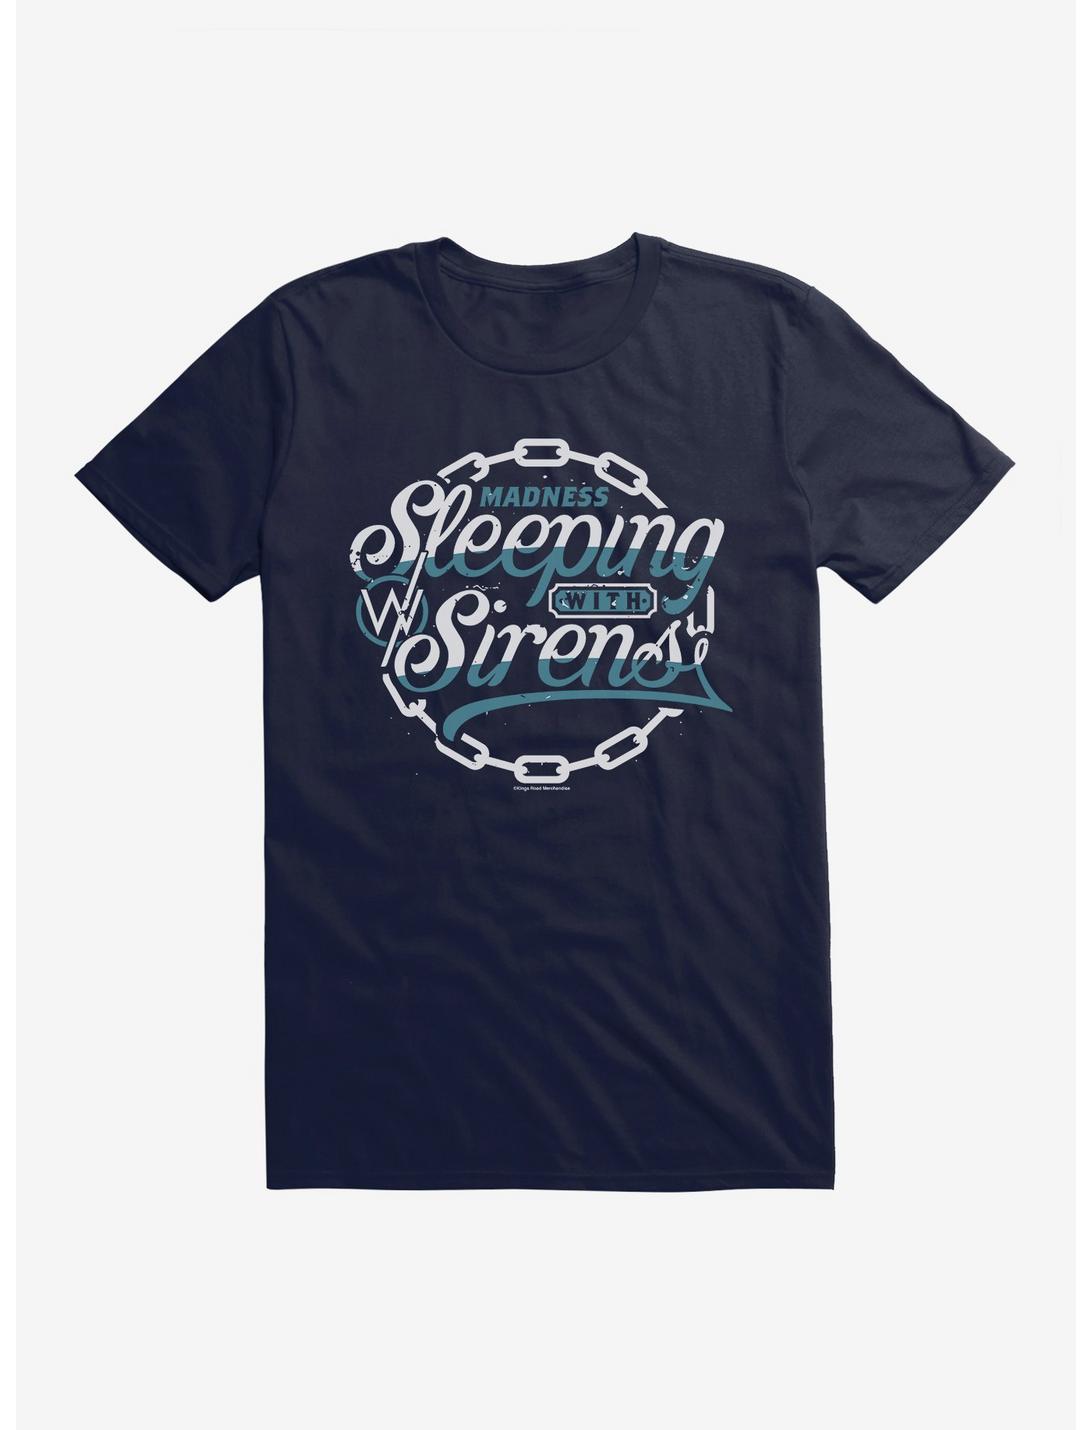 Sleeping With Sirens Madness T-Shirt, , hi-res